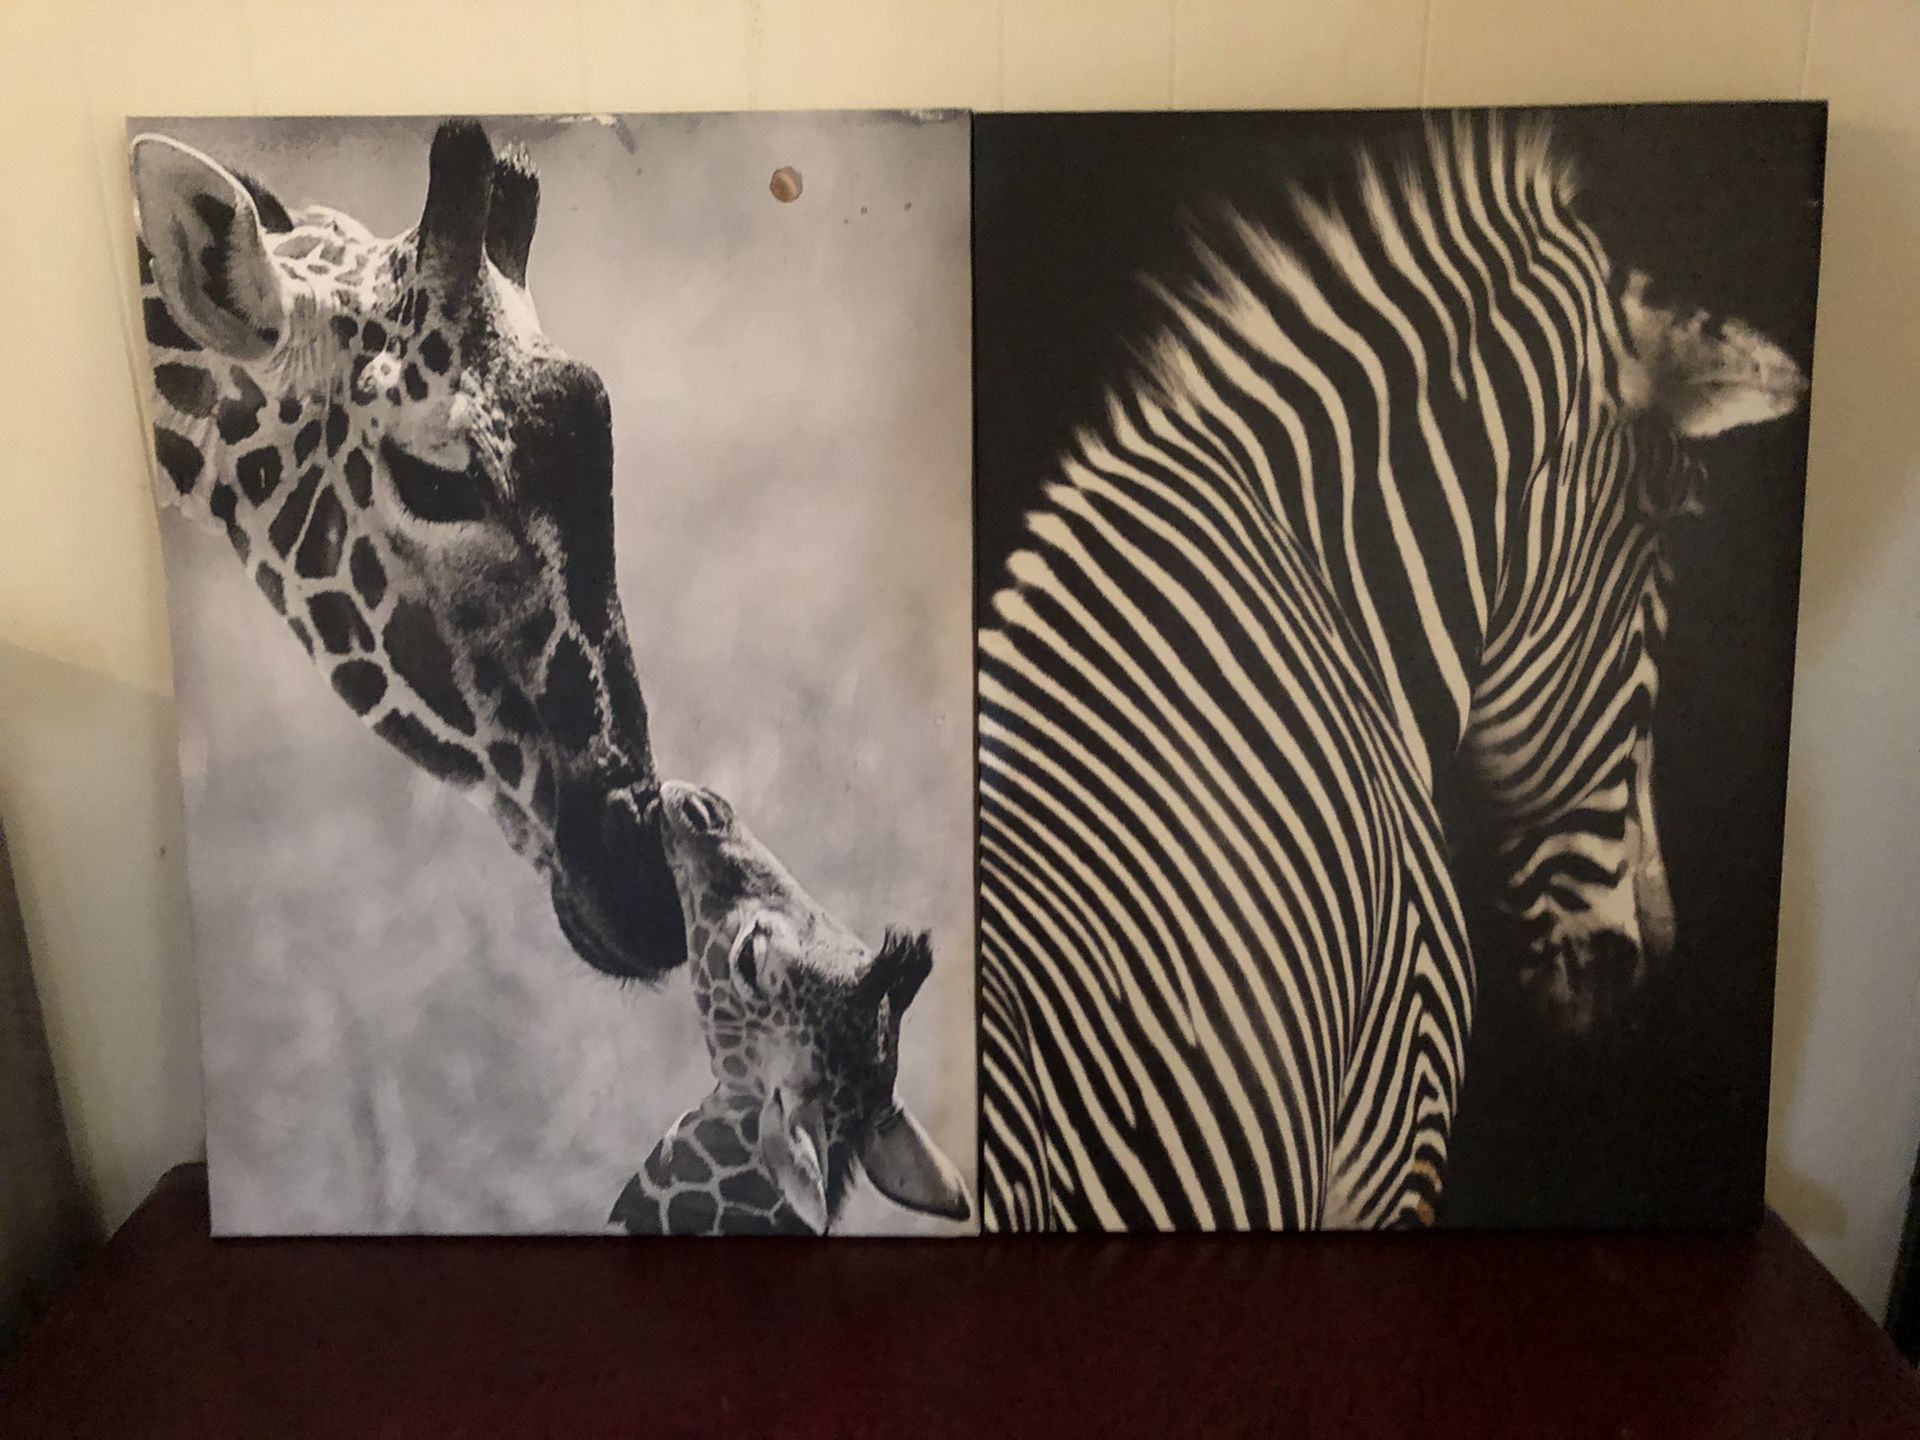 Pictures of a zebra and giraffes